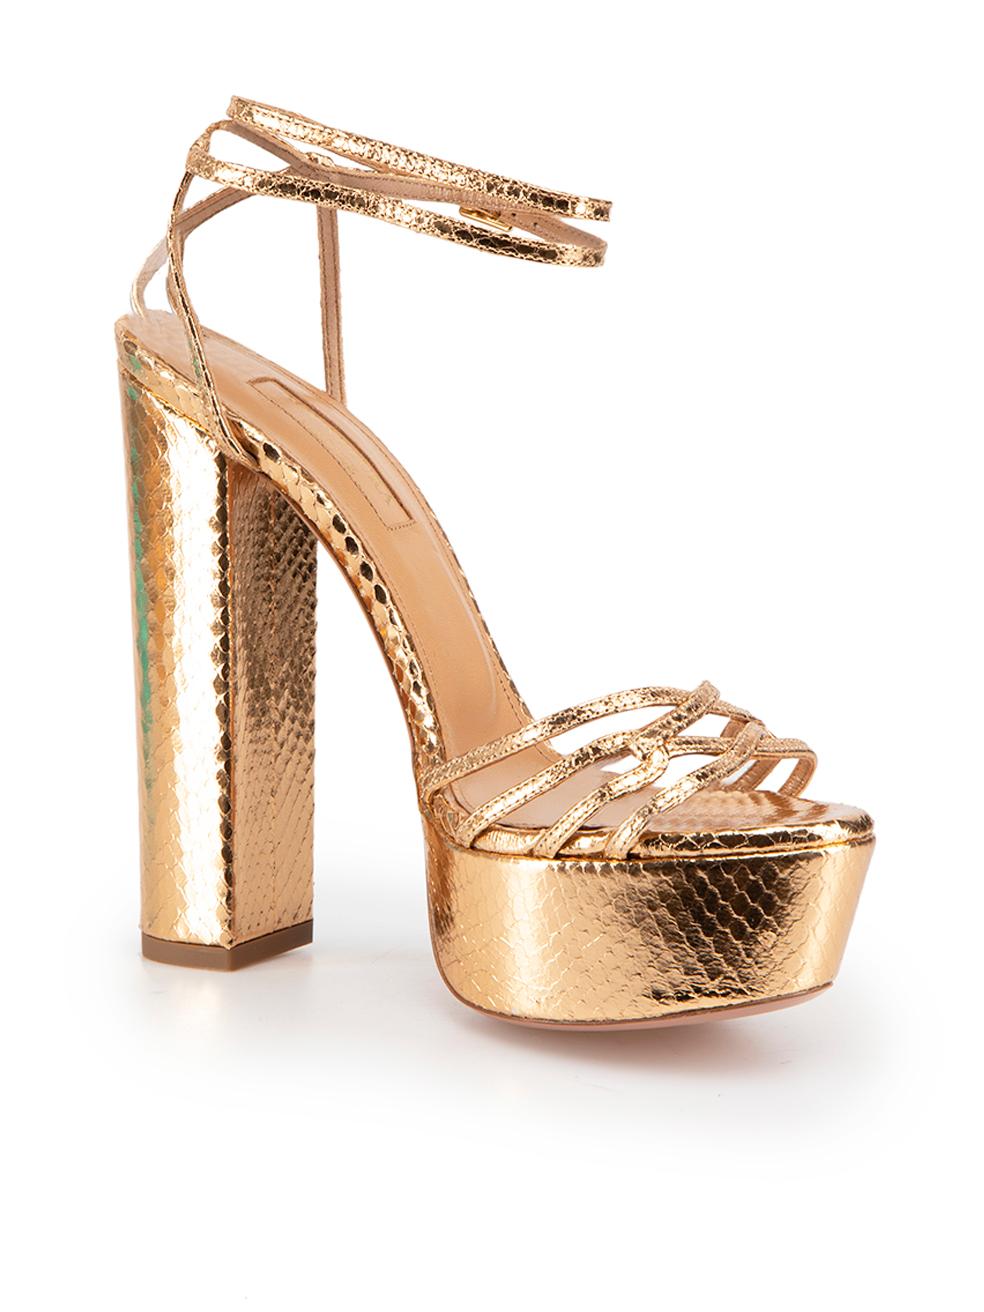 CONDITION is Never worn. No visible wear to shoes is evident on this new Aquazzura designer resale item.

Details
Gold
Leather
Heeled sandals
Snakeskin embossed
Open toe
Platform
Adjustable ankle strap
High heeled
Made in